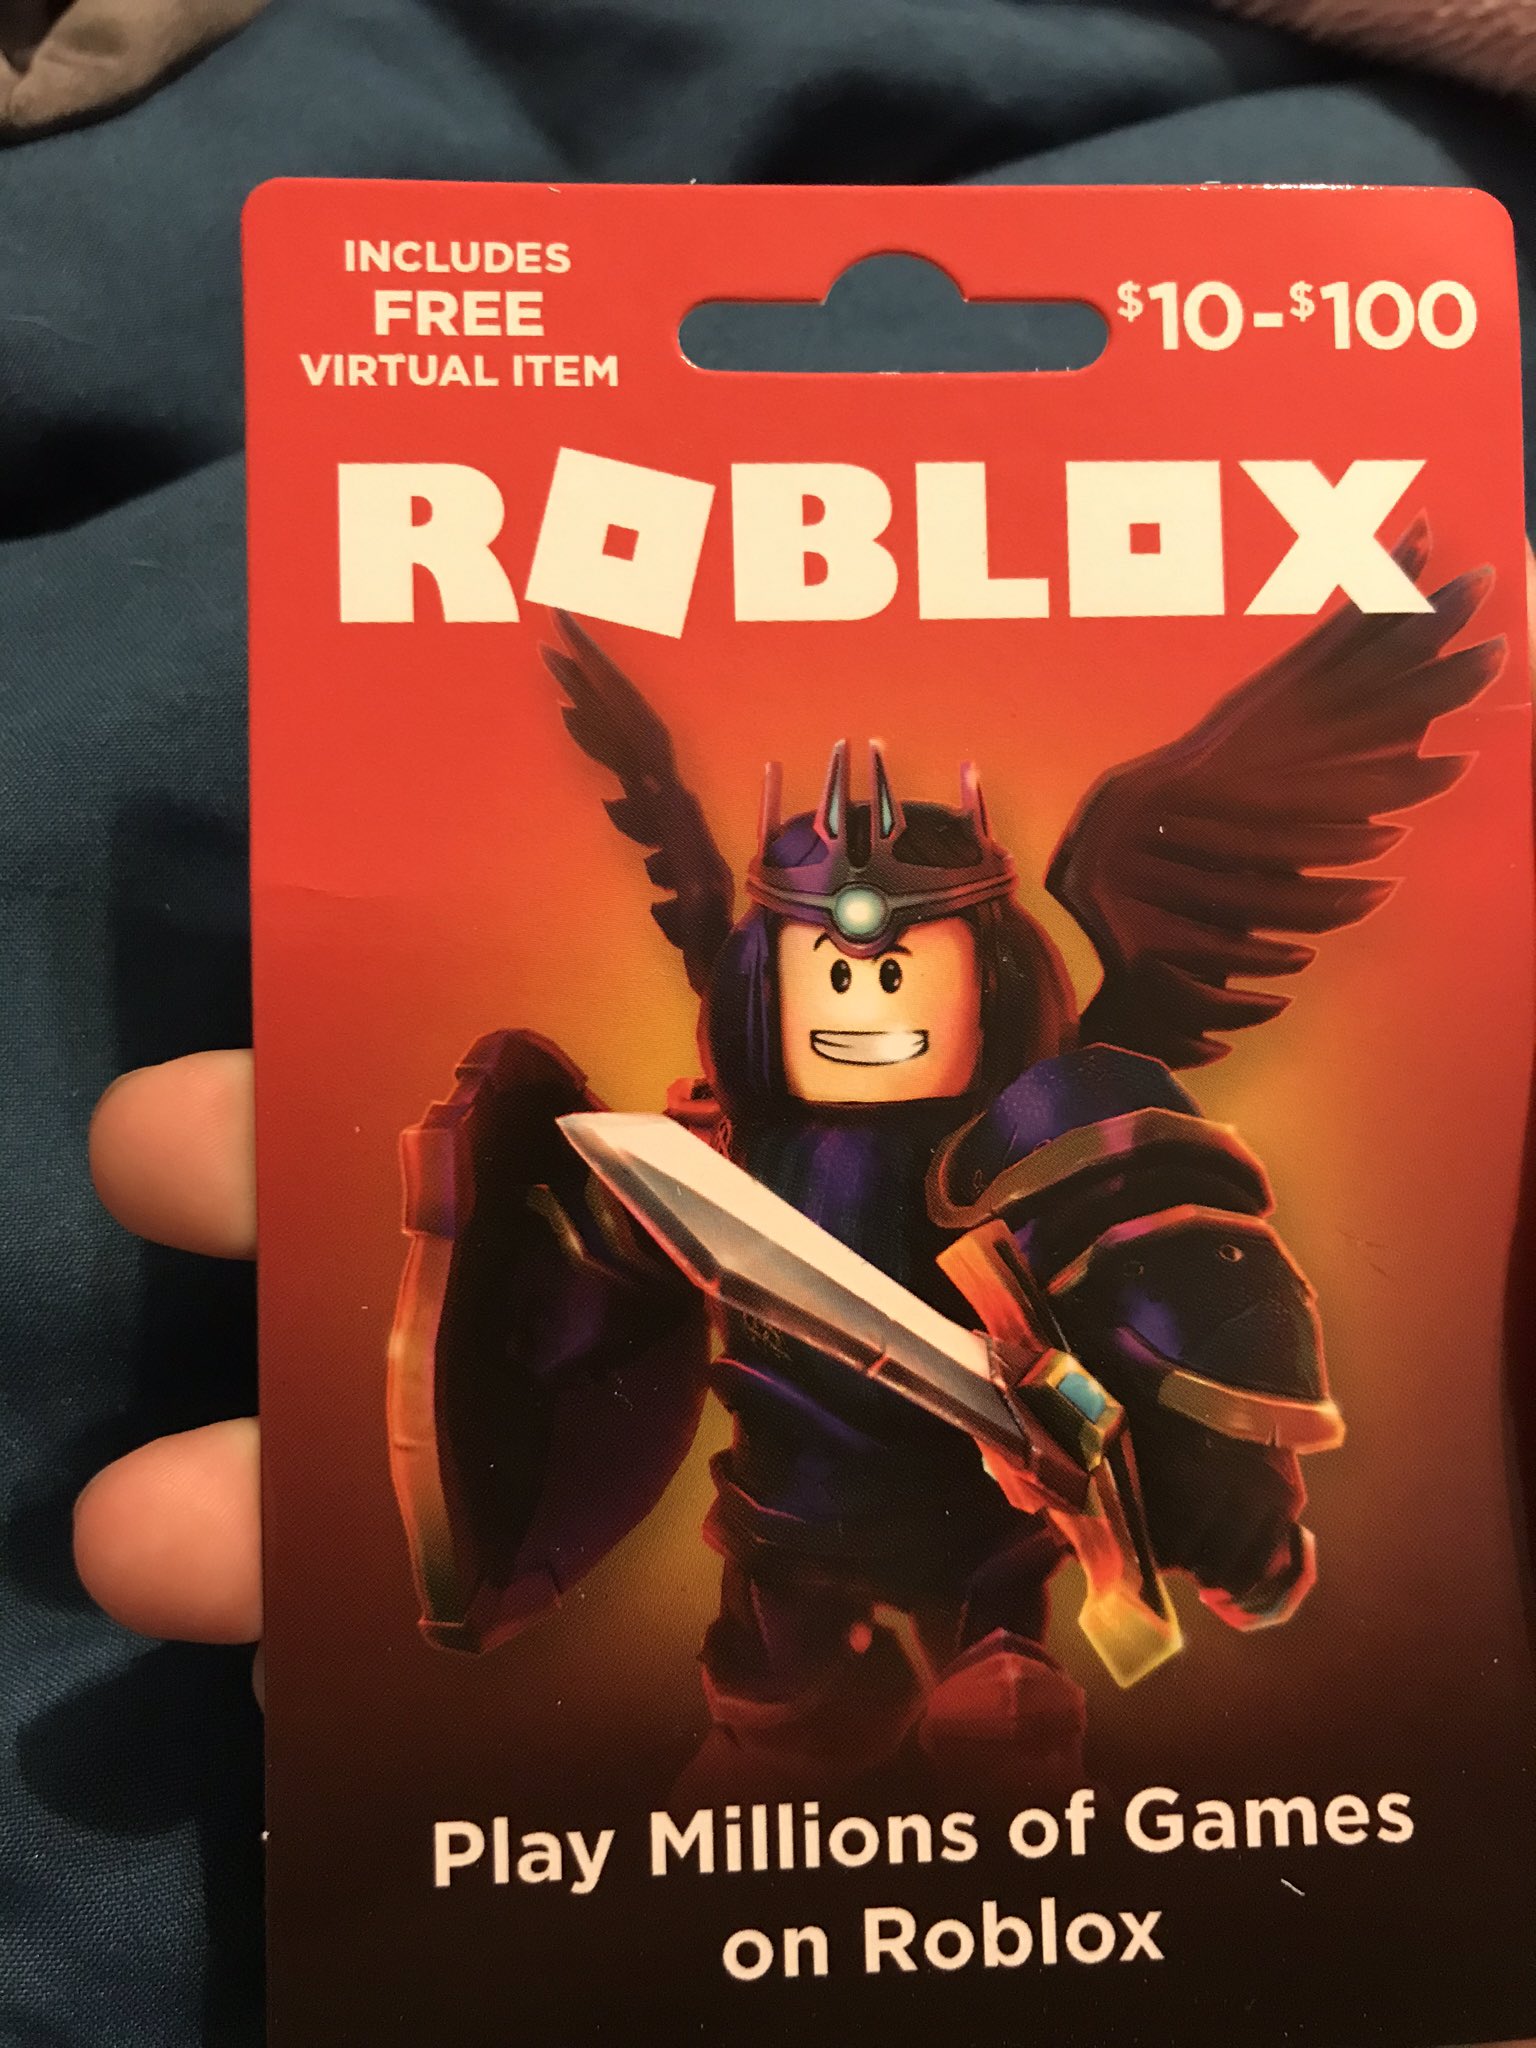 Trading 20 dollar roblox gift card for any huge taking free stuff